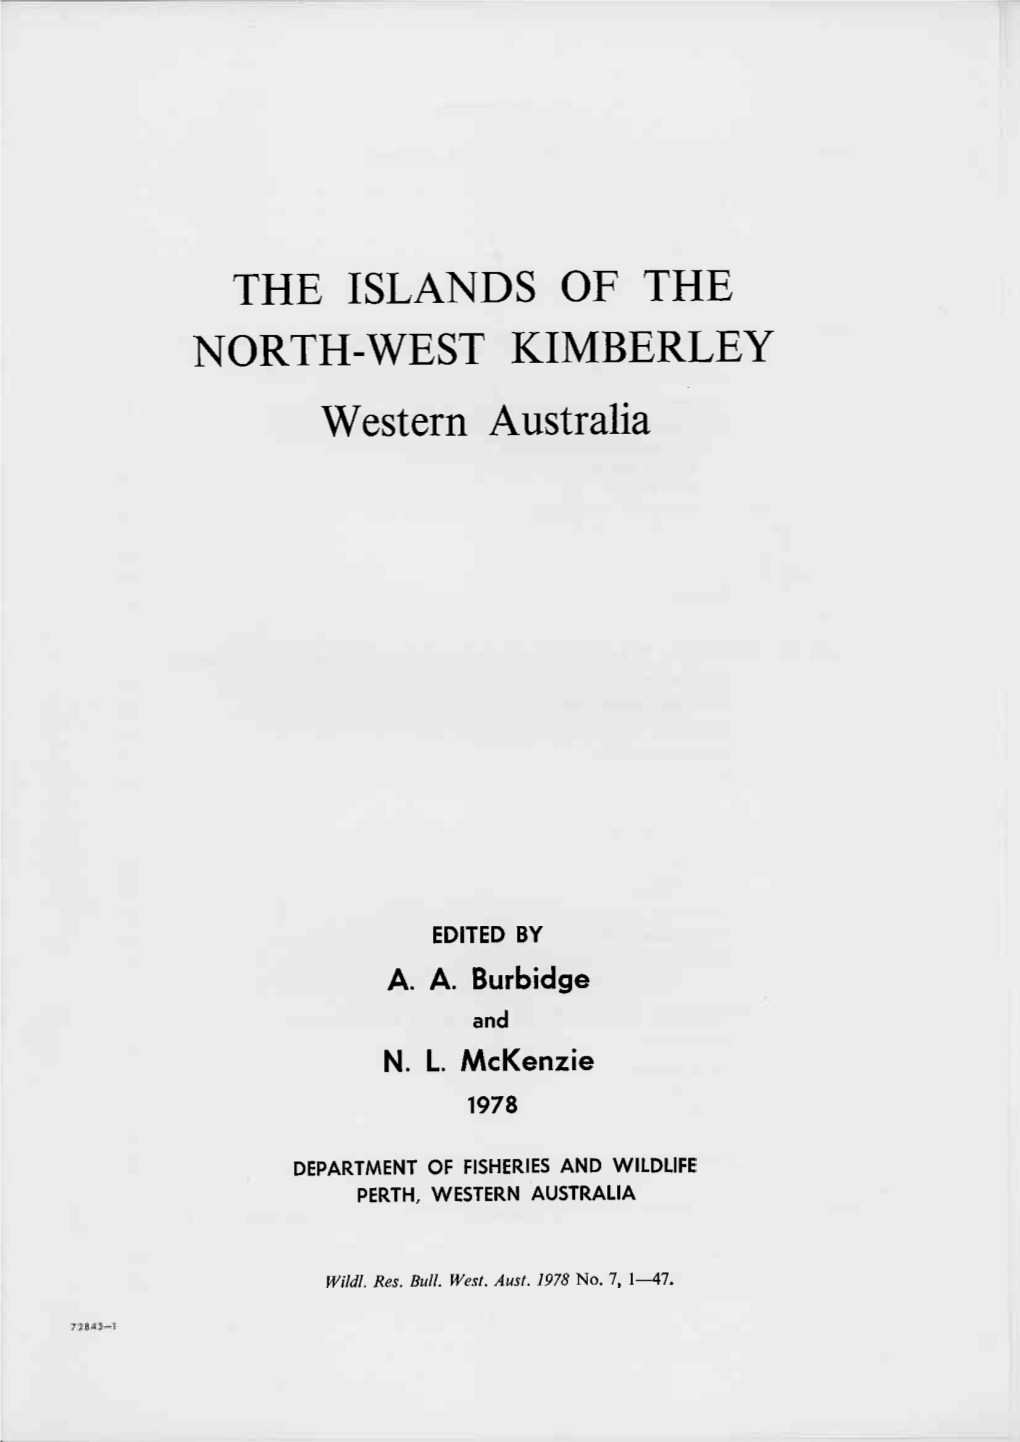 The Islands of the North.West Kimberley